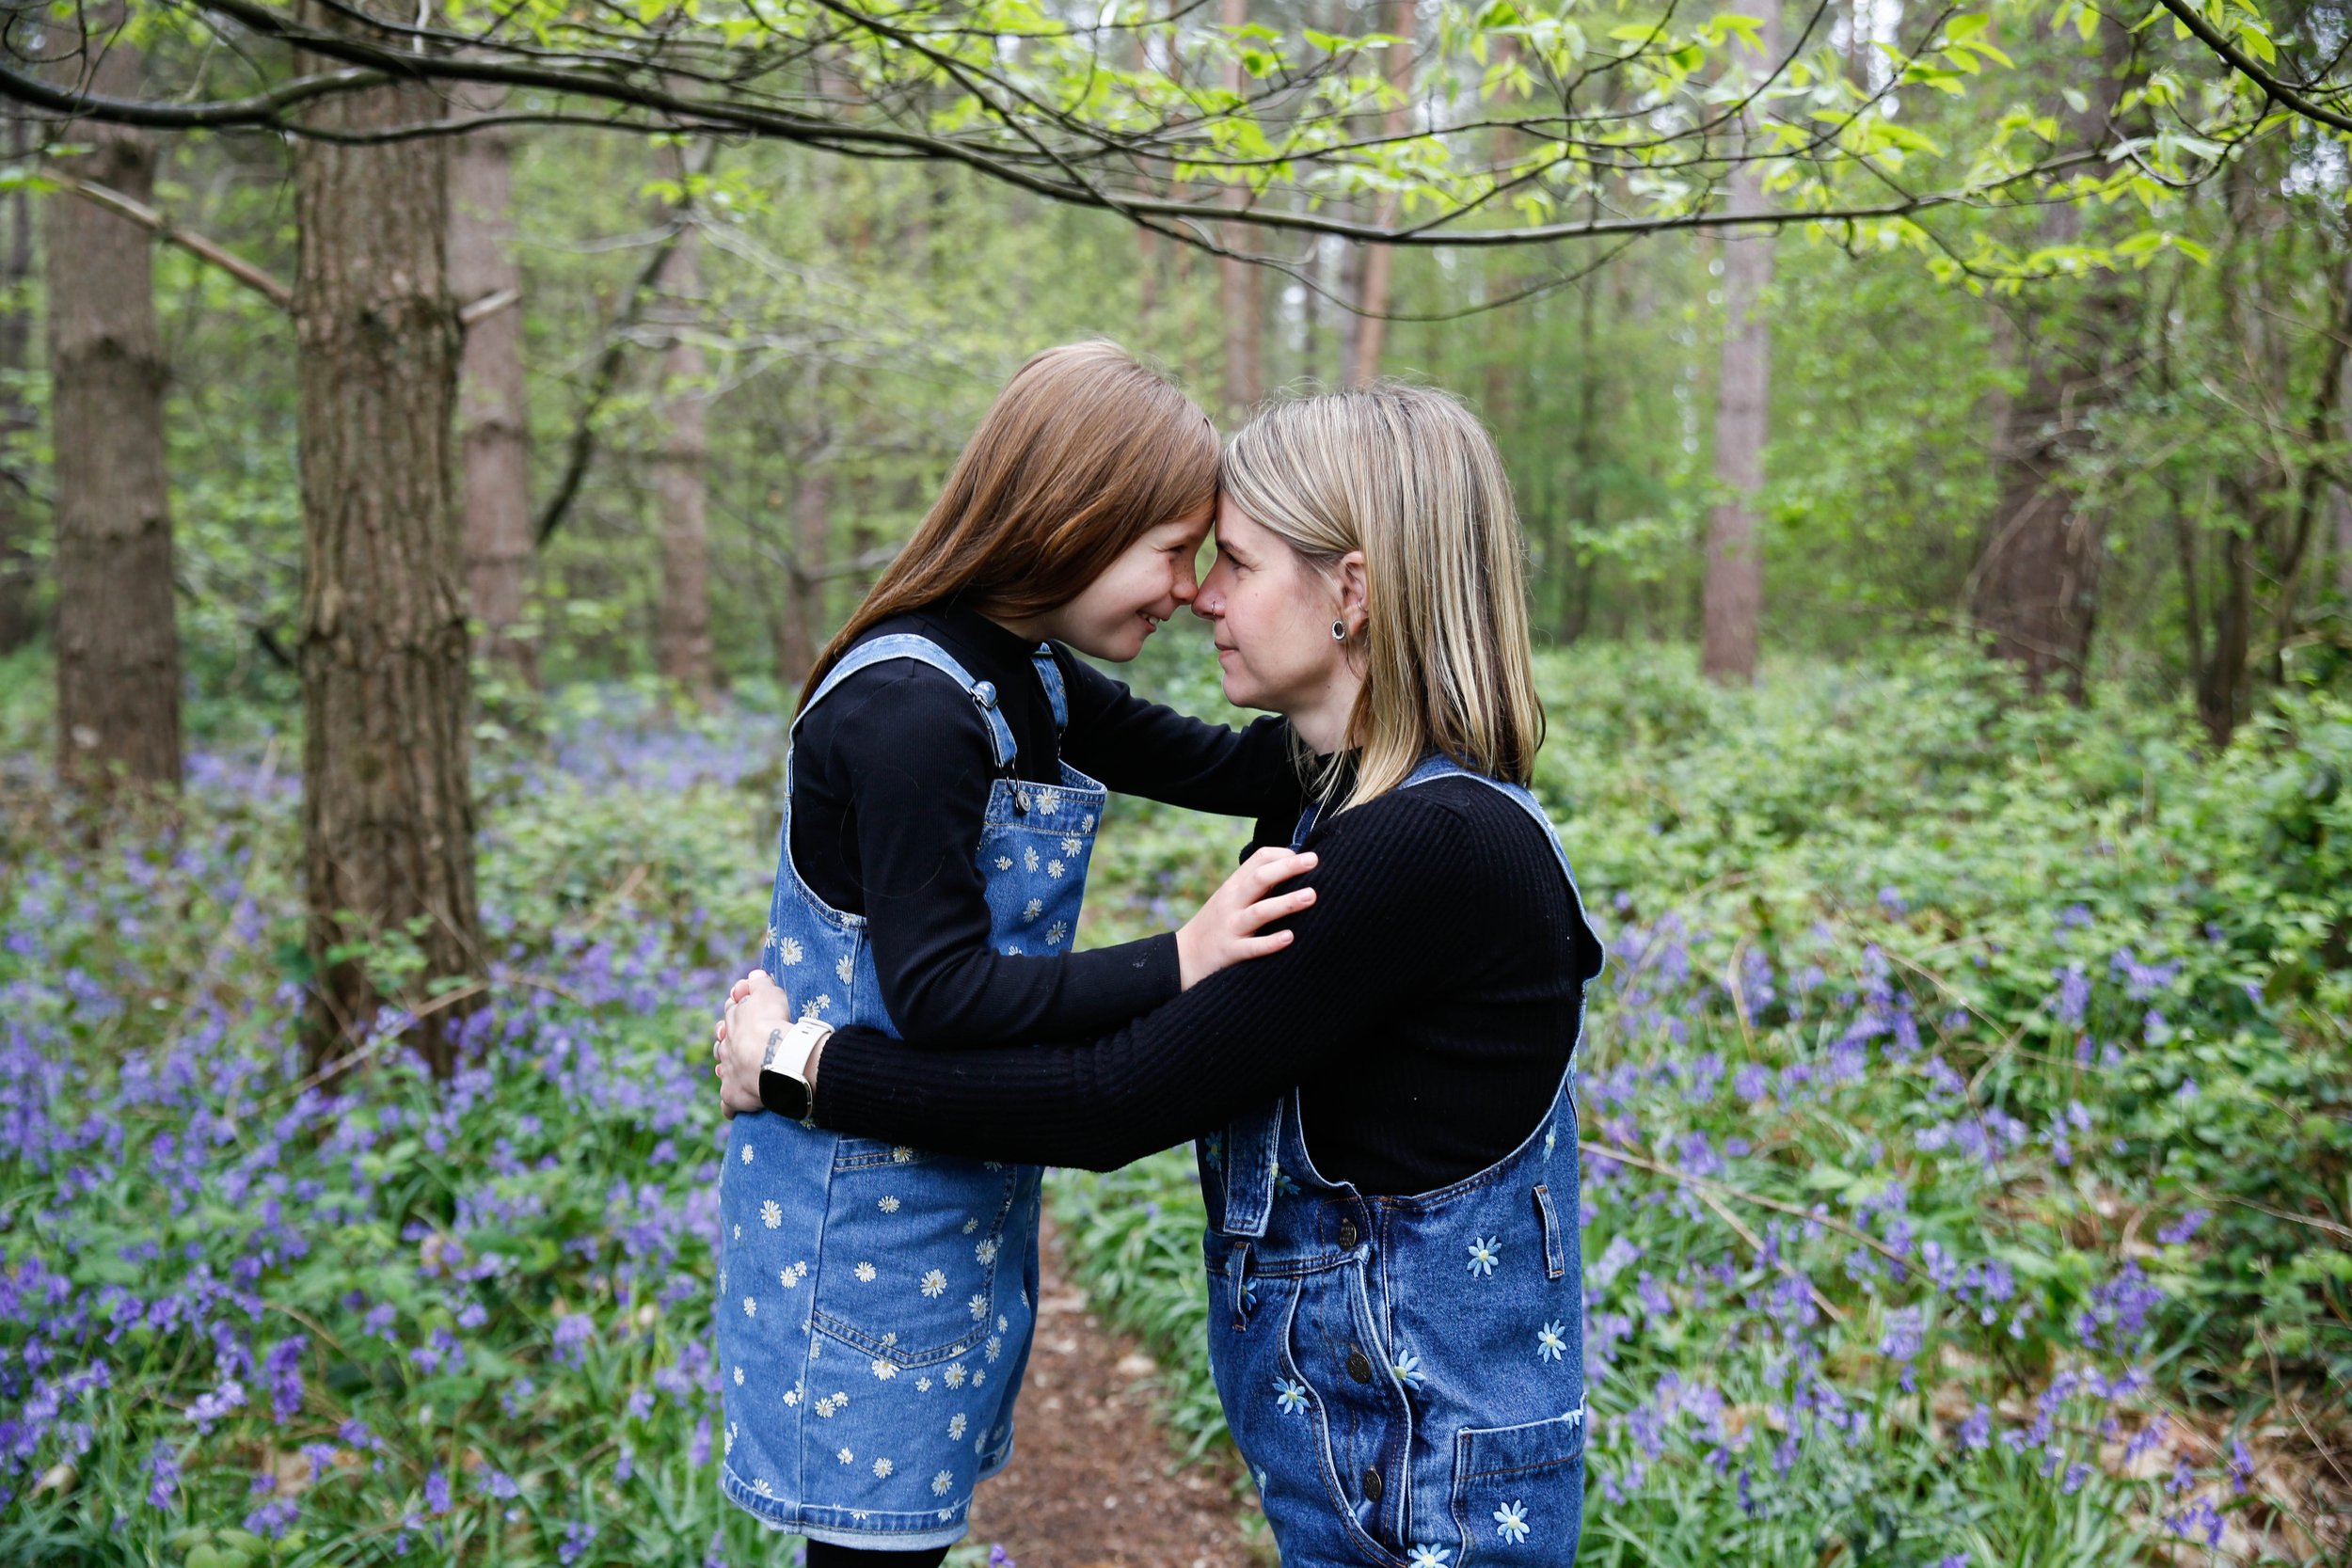 MUM AND DAUGHTER PHOTO SHOOT IN THE BLUEBELLS | BERKSHIRE PORTRAIT SHOOTS11 choice .JPG